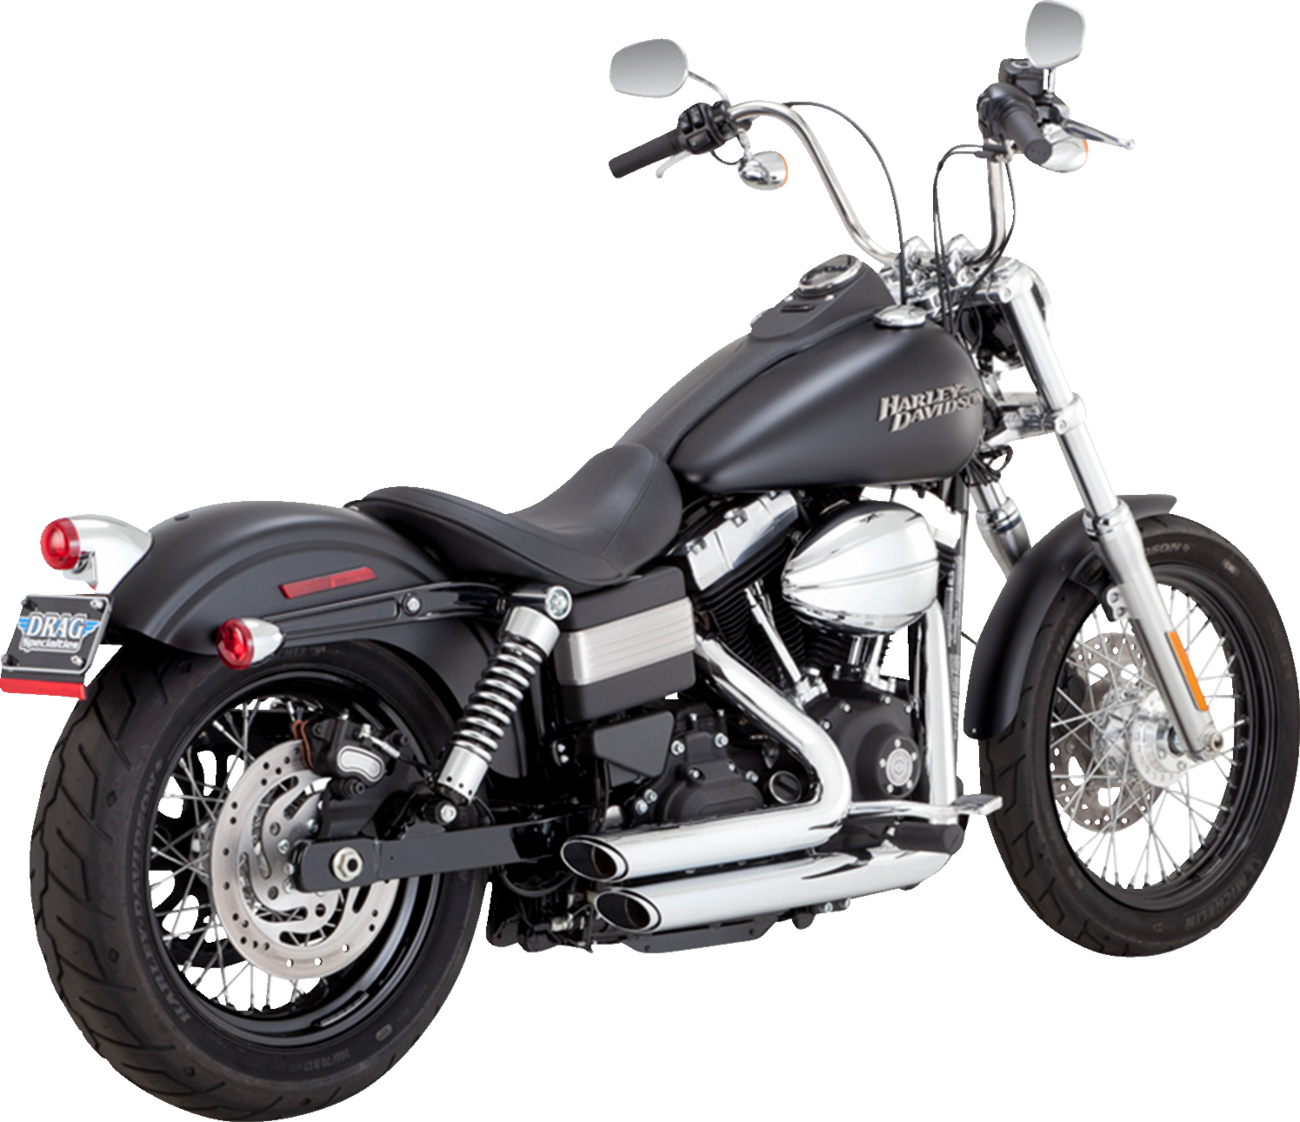 VANCE & HINES Short Shot Staggered Exhaust System - Chrome 17327